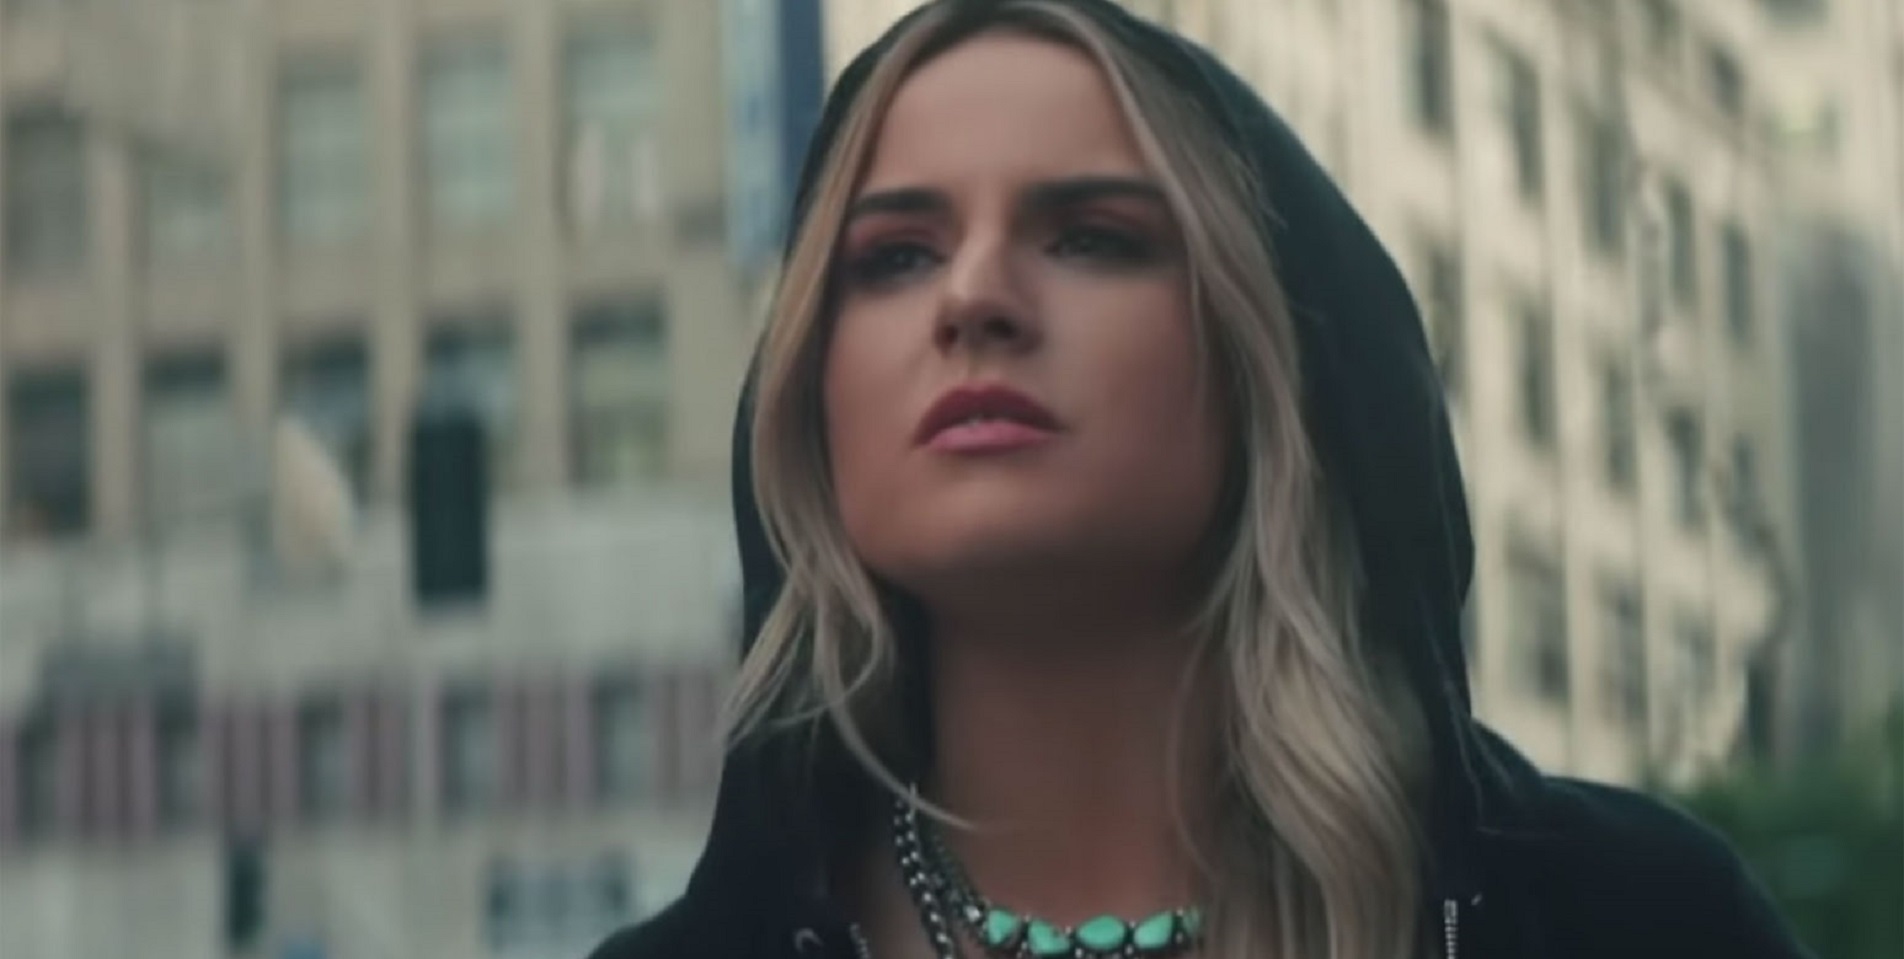 Jojo Speaks On How Her Contract as a Teen Ruined Her Music Career & Sent Her Into Depression